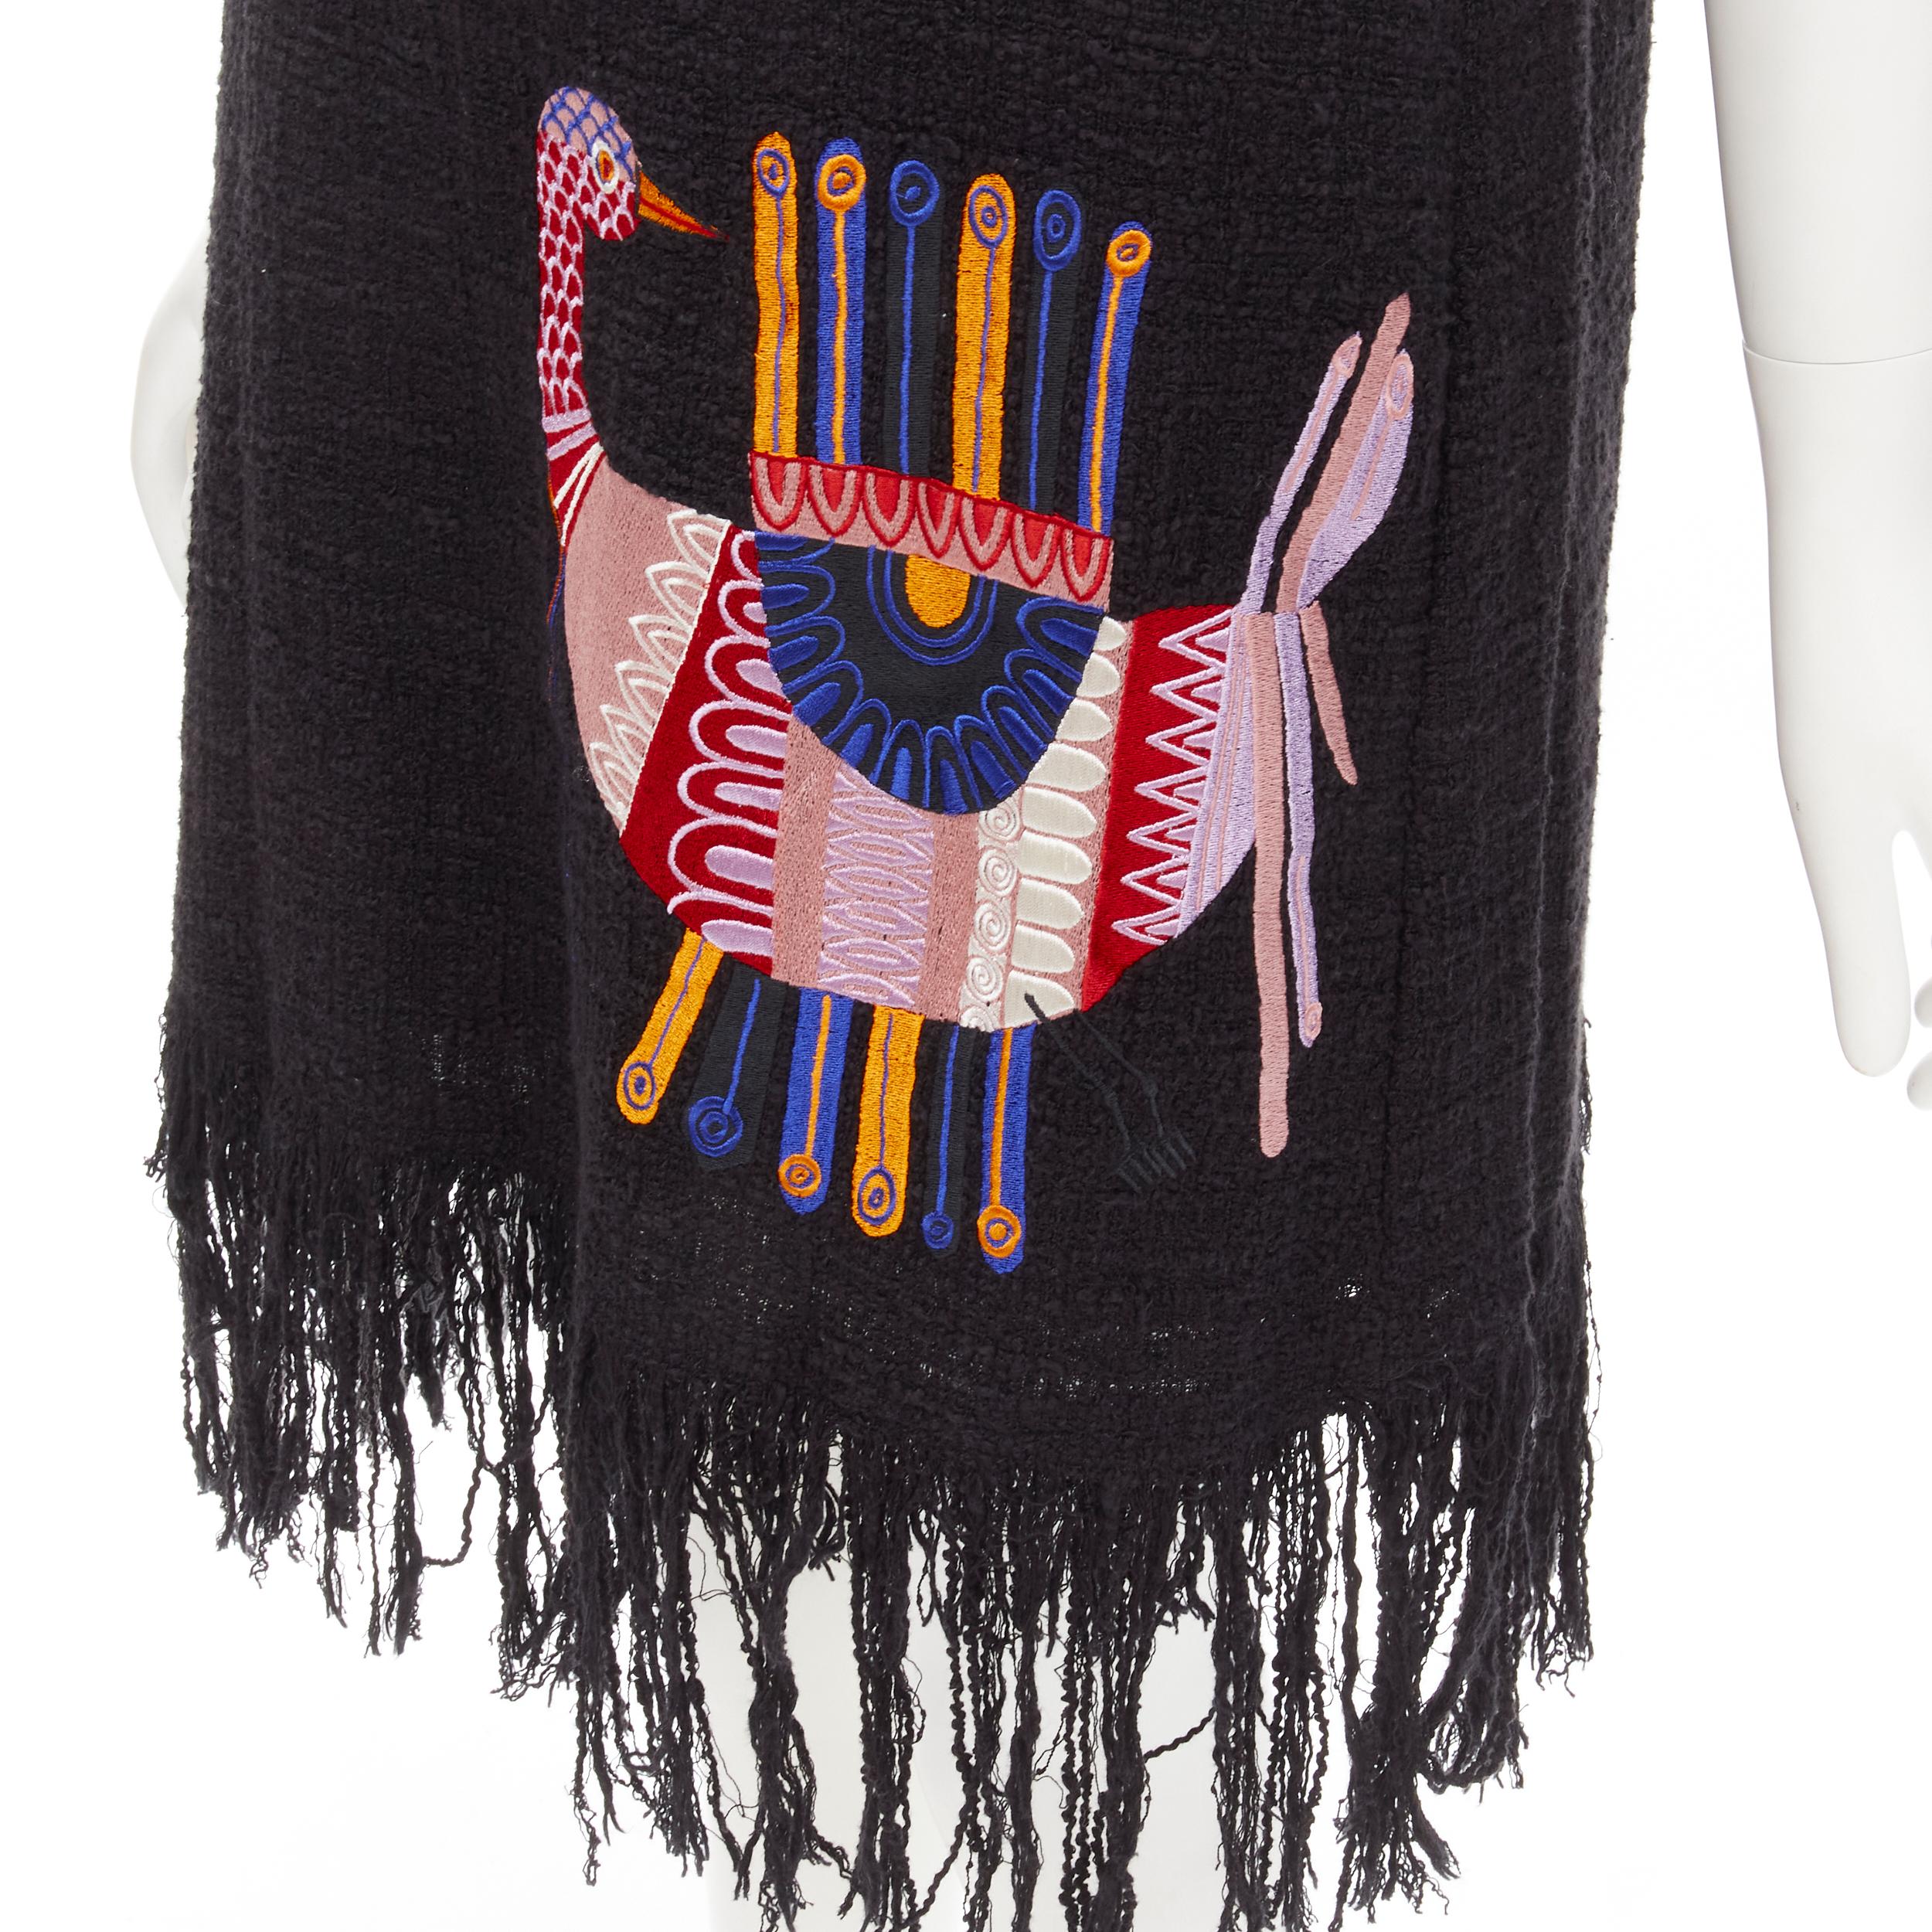 MSGM tweed ethnic bird embroidery fringe hem little black dress IT40 S
Brand: MSGM
Material: Cotton
Color: Black
Pattern: Solid
Closure: Zip
Made in: Italy

CONDITION:
Condition: Excellent, this item was pre-owned and is in excellent condition.